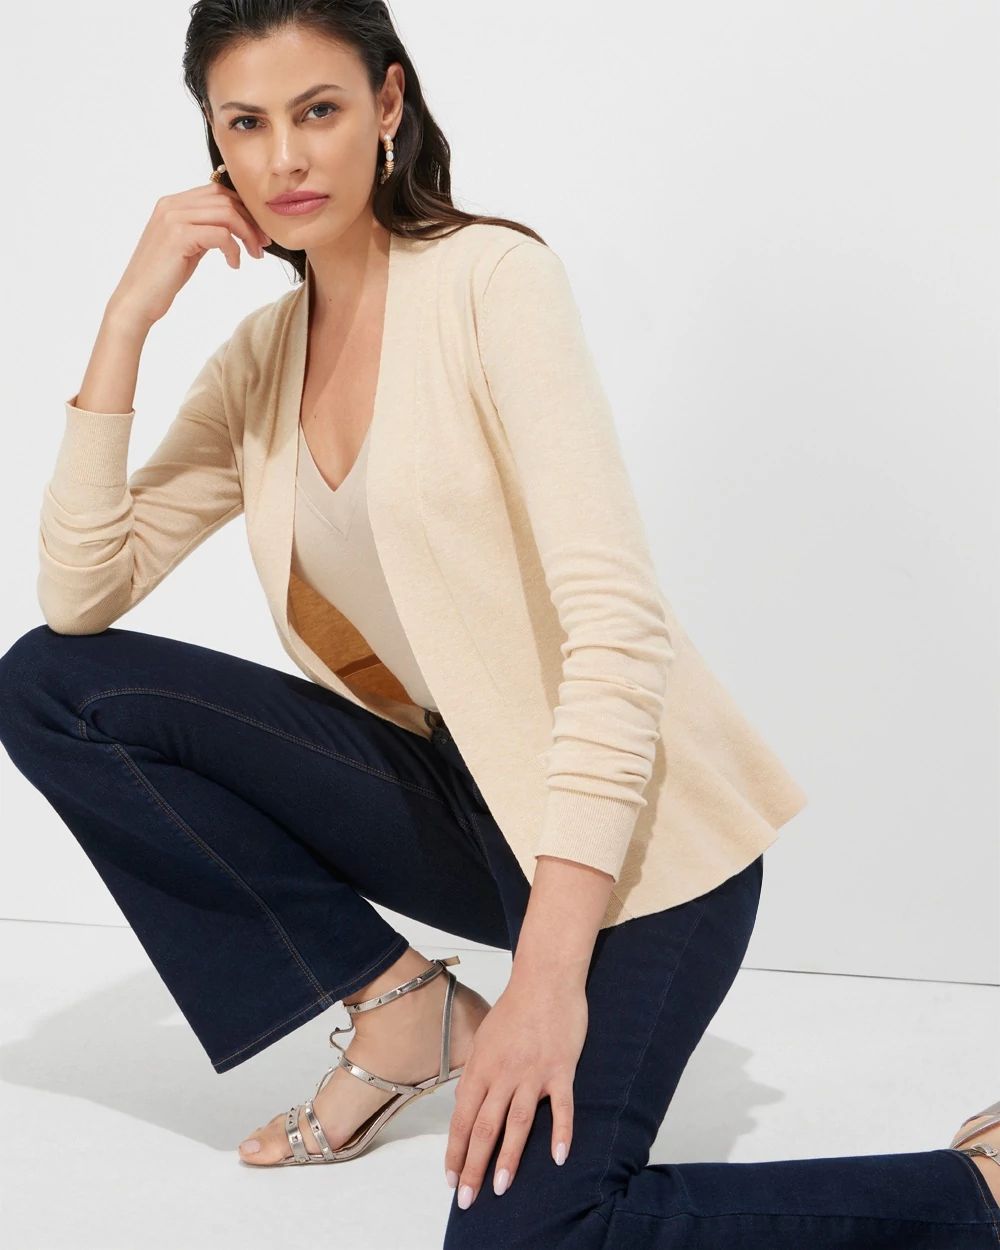 Outlet WHBM Peplum Cardigan click to view larger image.